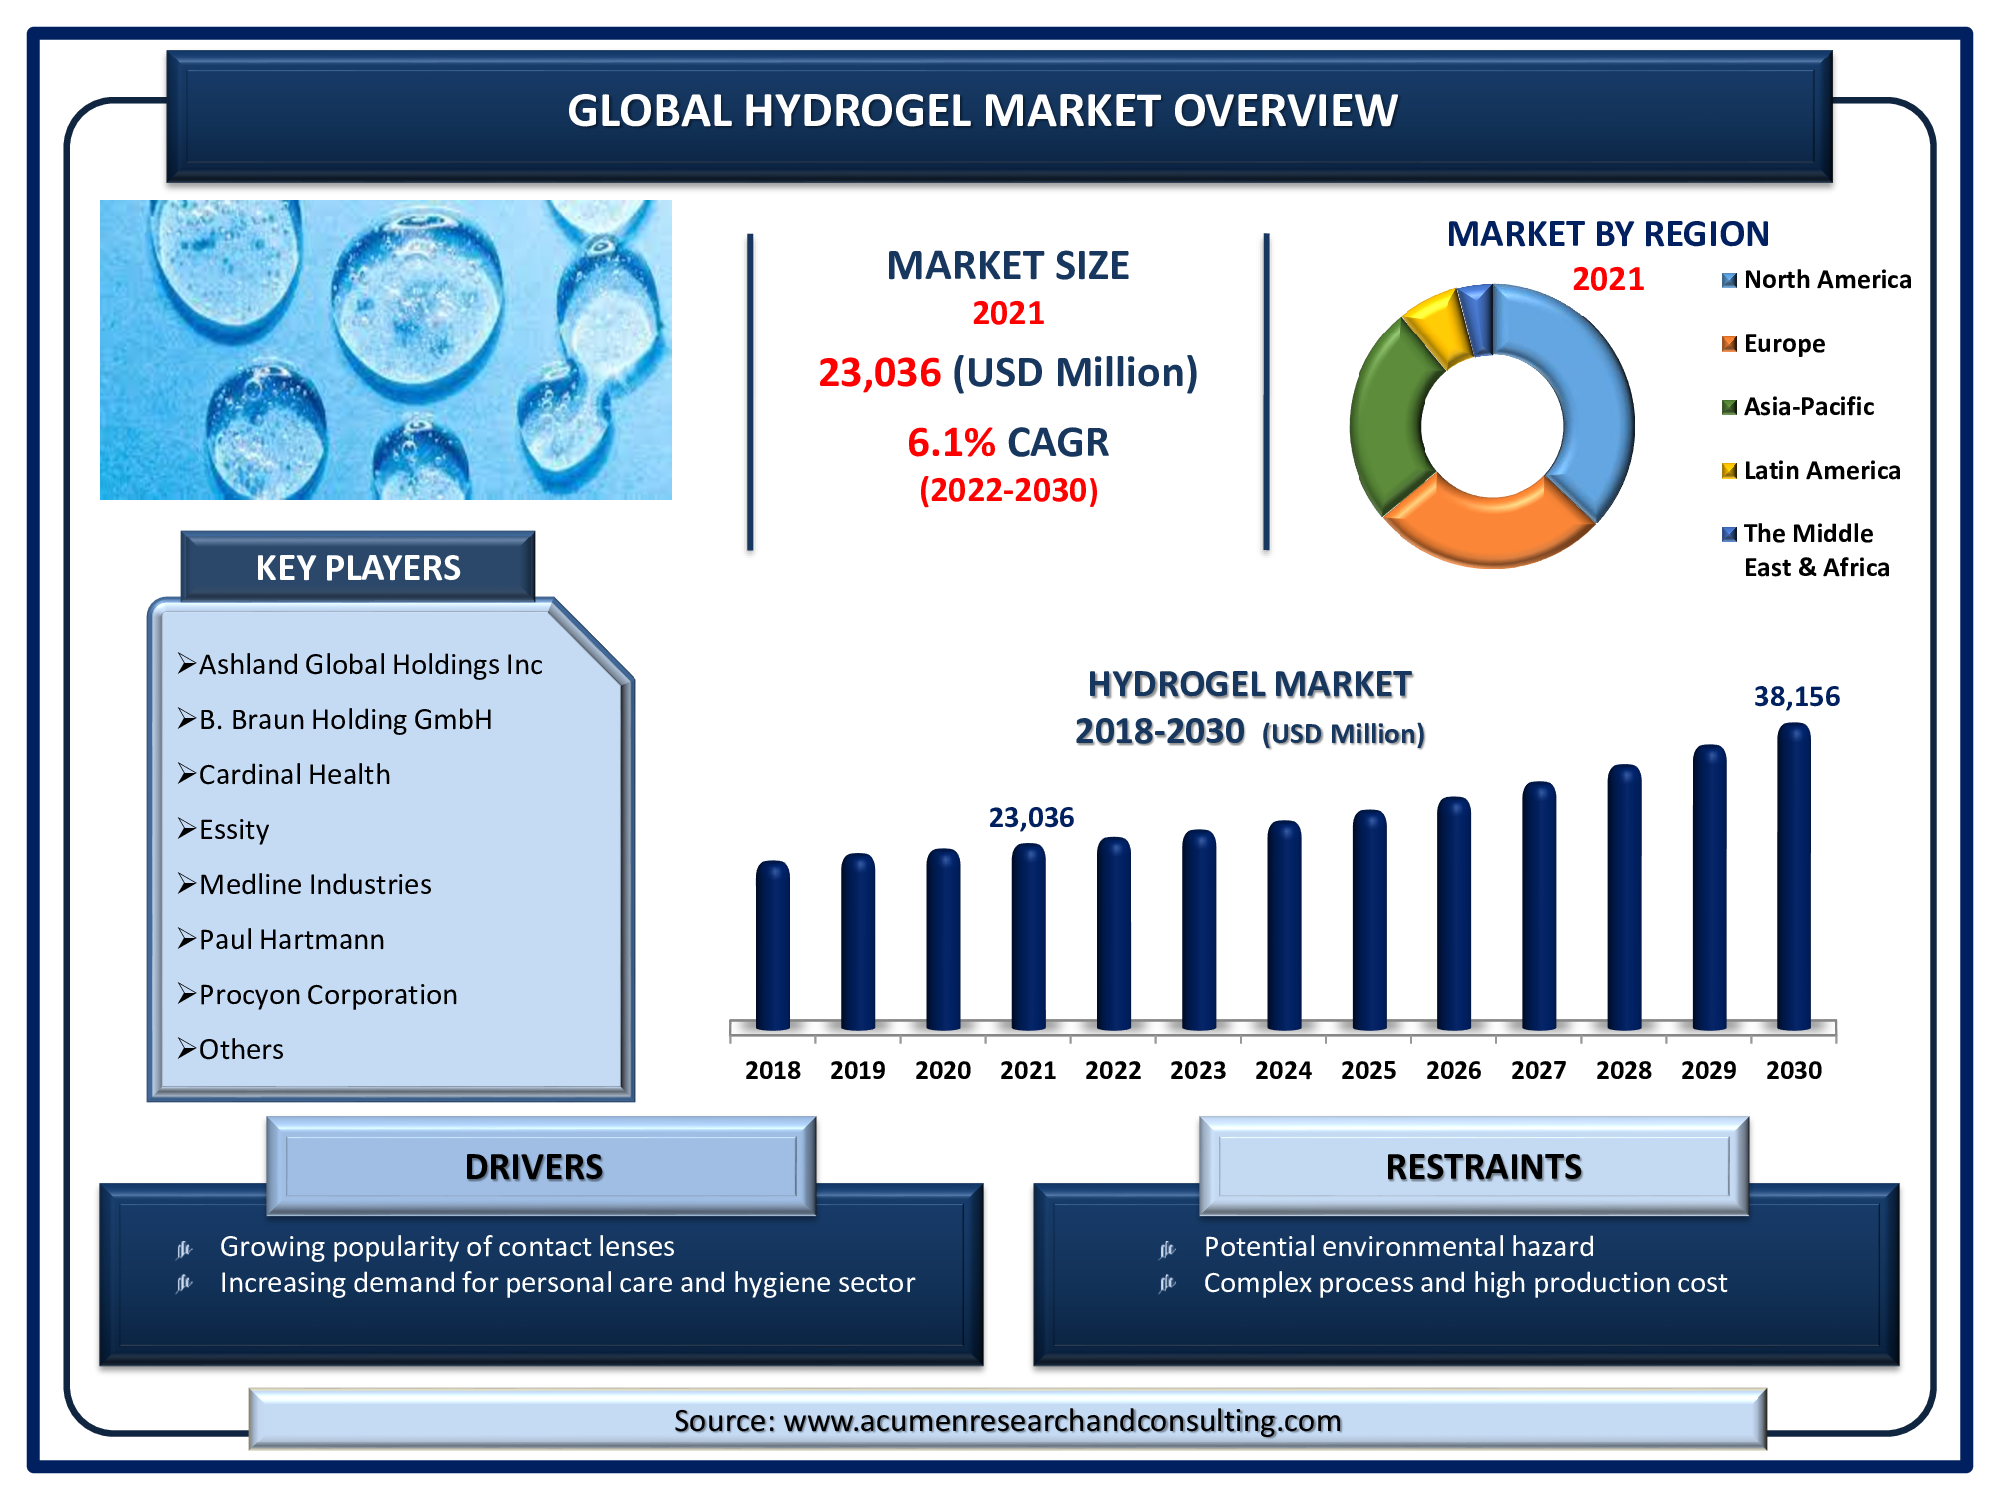 Hydrogel Market size was accounted for USD 23,036 Million in 2021 and is estimated to reach USD 38,156 Million by 2030, with a CAGR of 6.1% from 2022 to 2030.